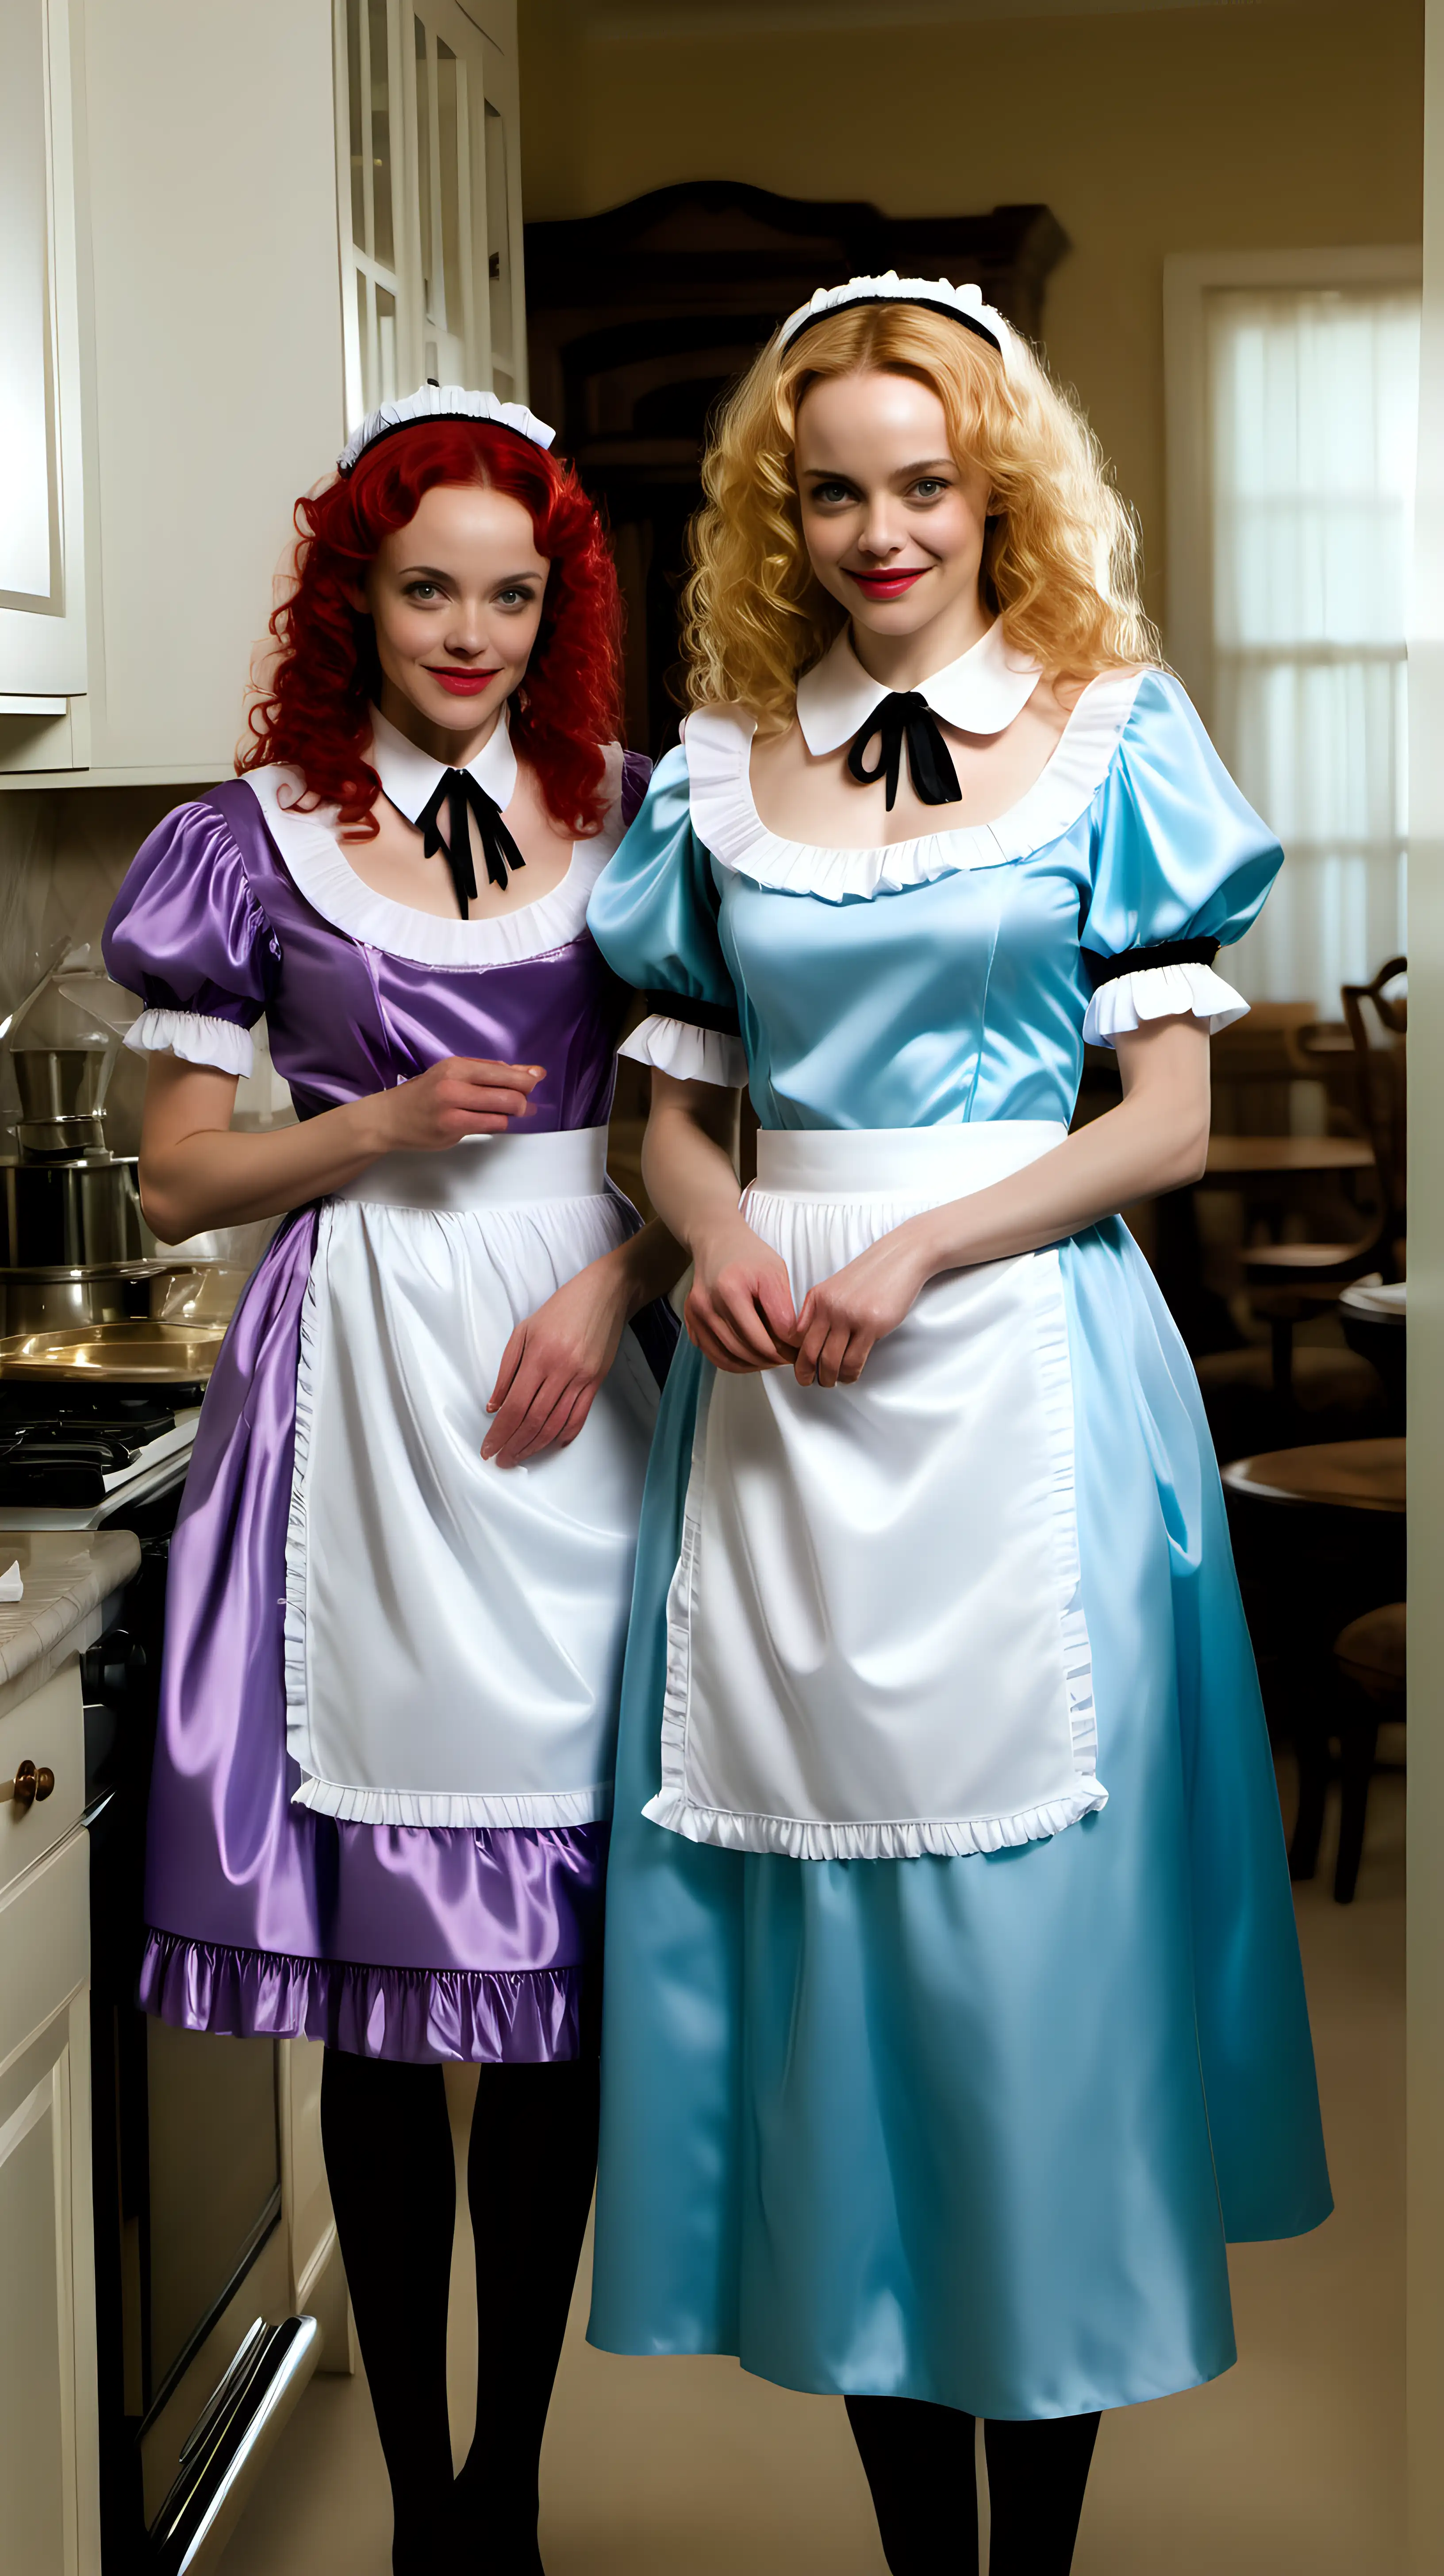 Vintage English Maid and Mothers Smiling in Retro Style Home